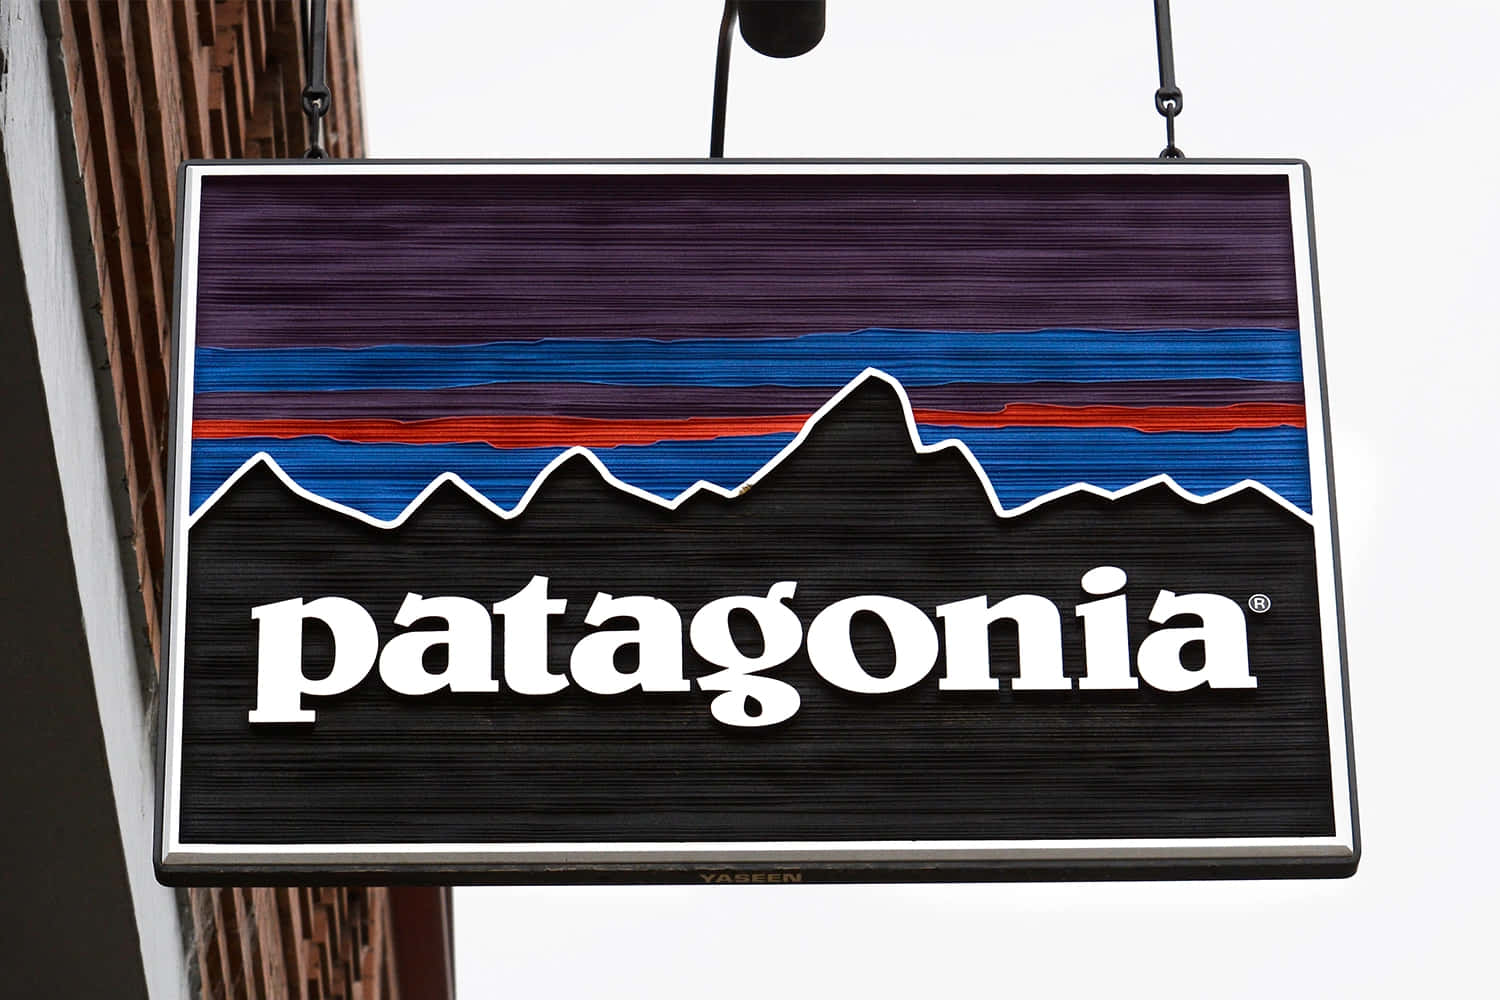 Experience the beauty of Patagonia - a place to connect with nature.